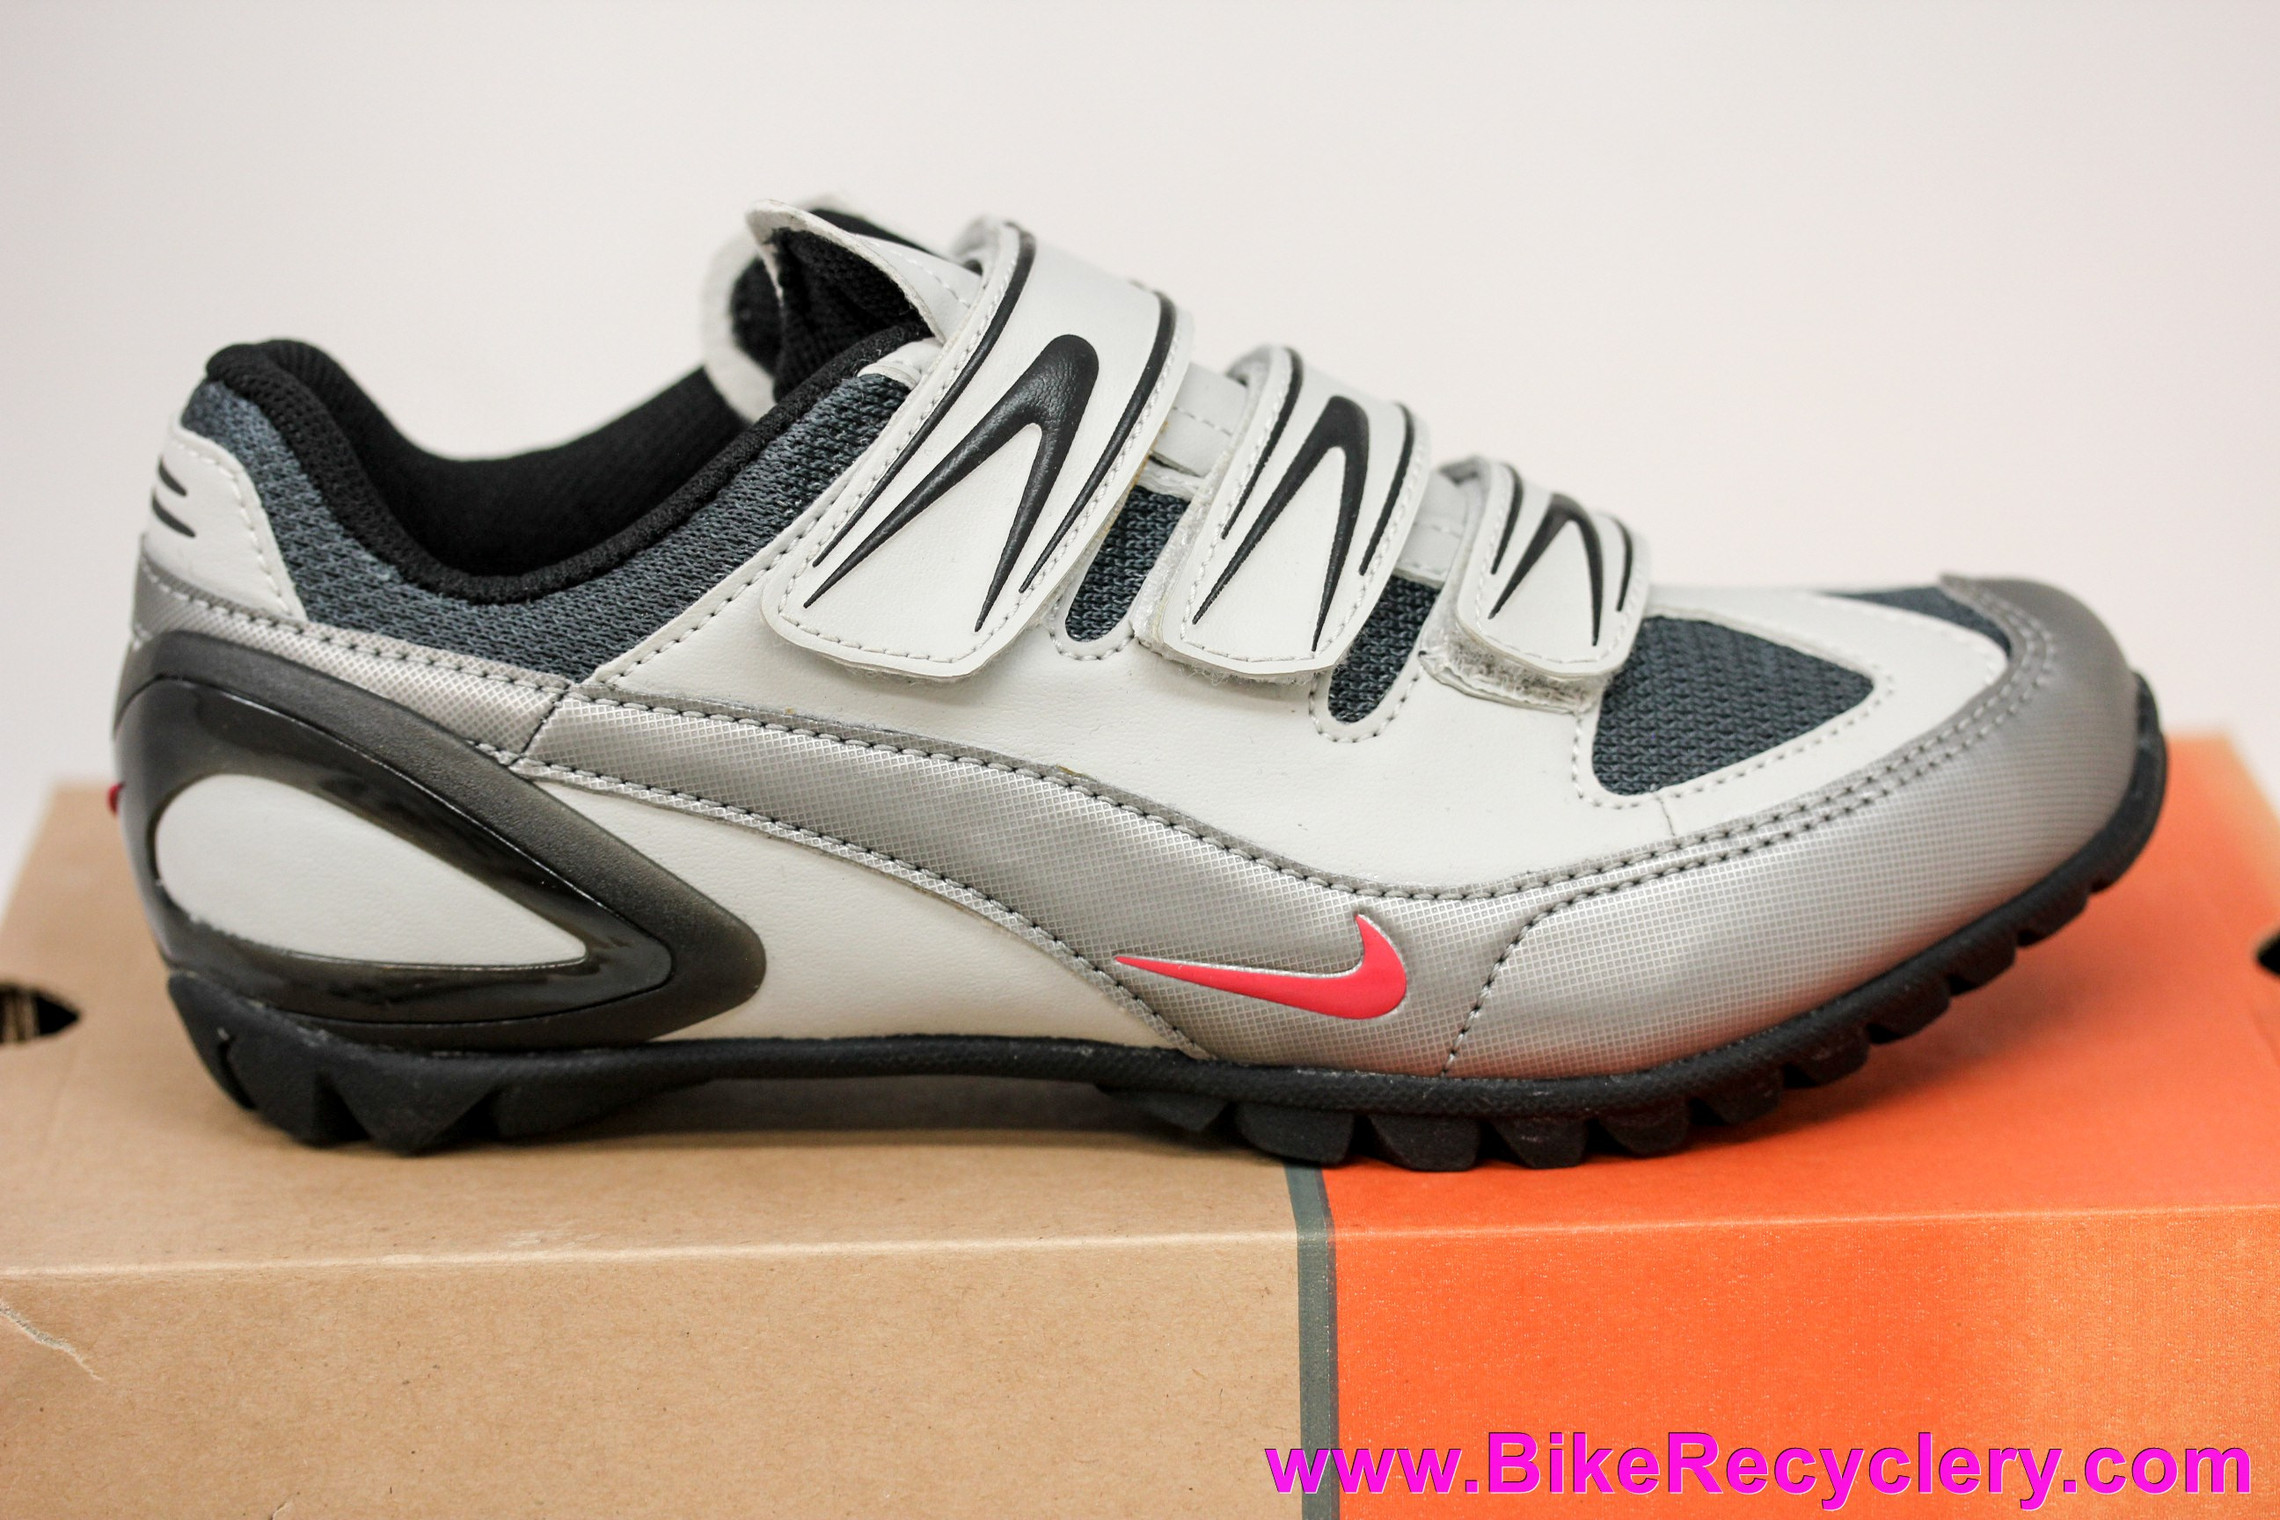 Nike Granfondo WR Women's Road Cycling / Spin Shoes: Size 37 - Two Bolt Cleats - Walkable - Grey/Black (NEW)